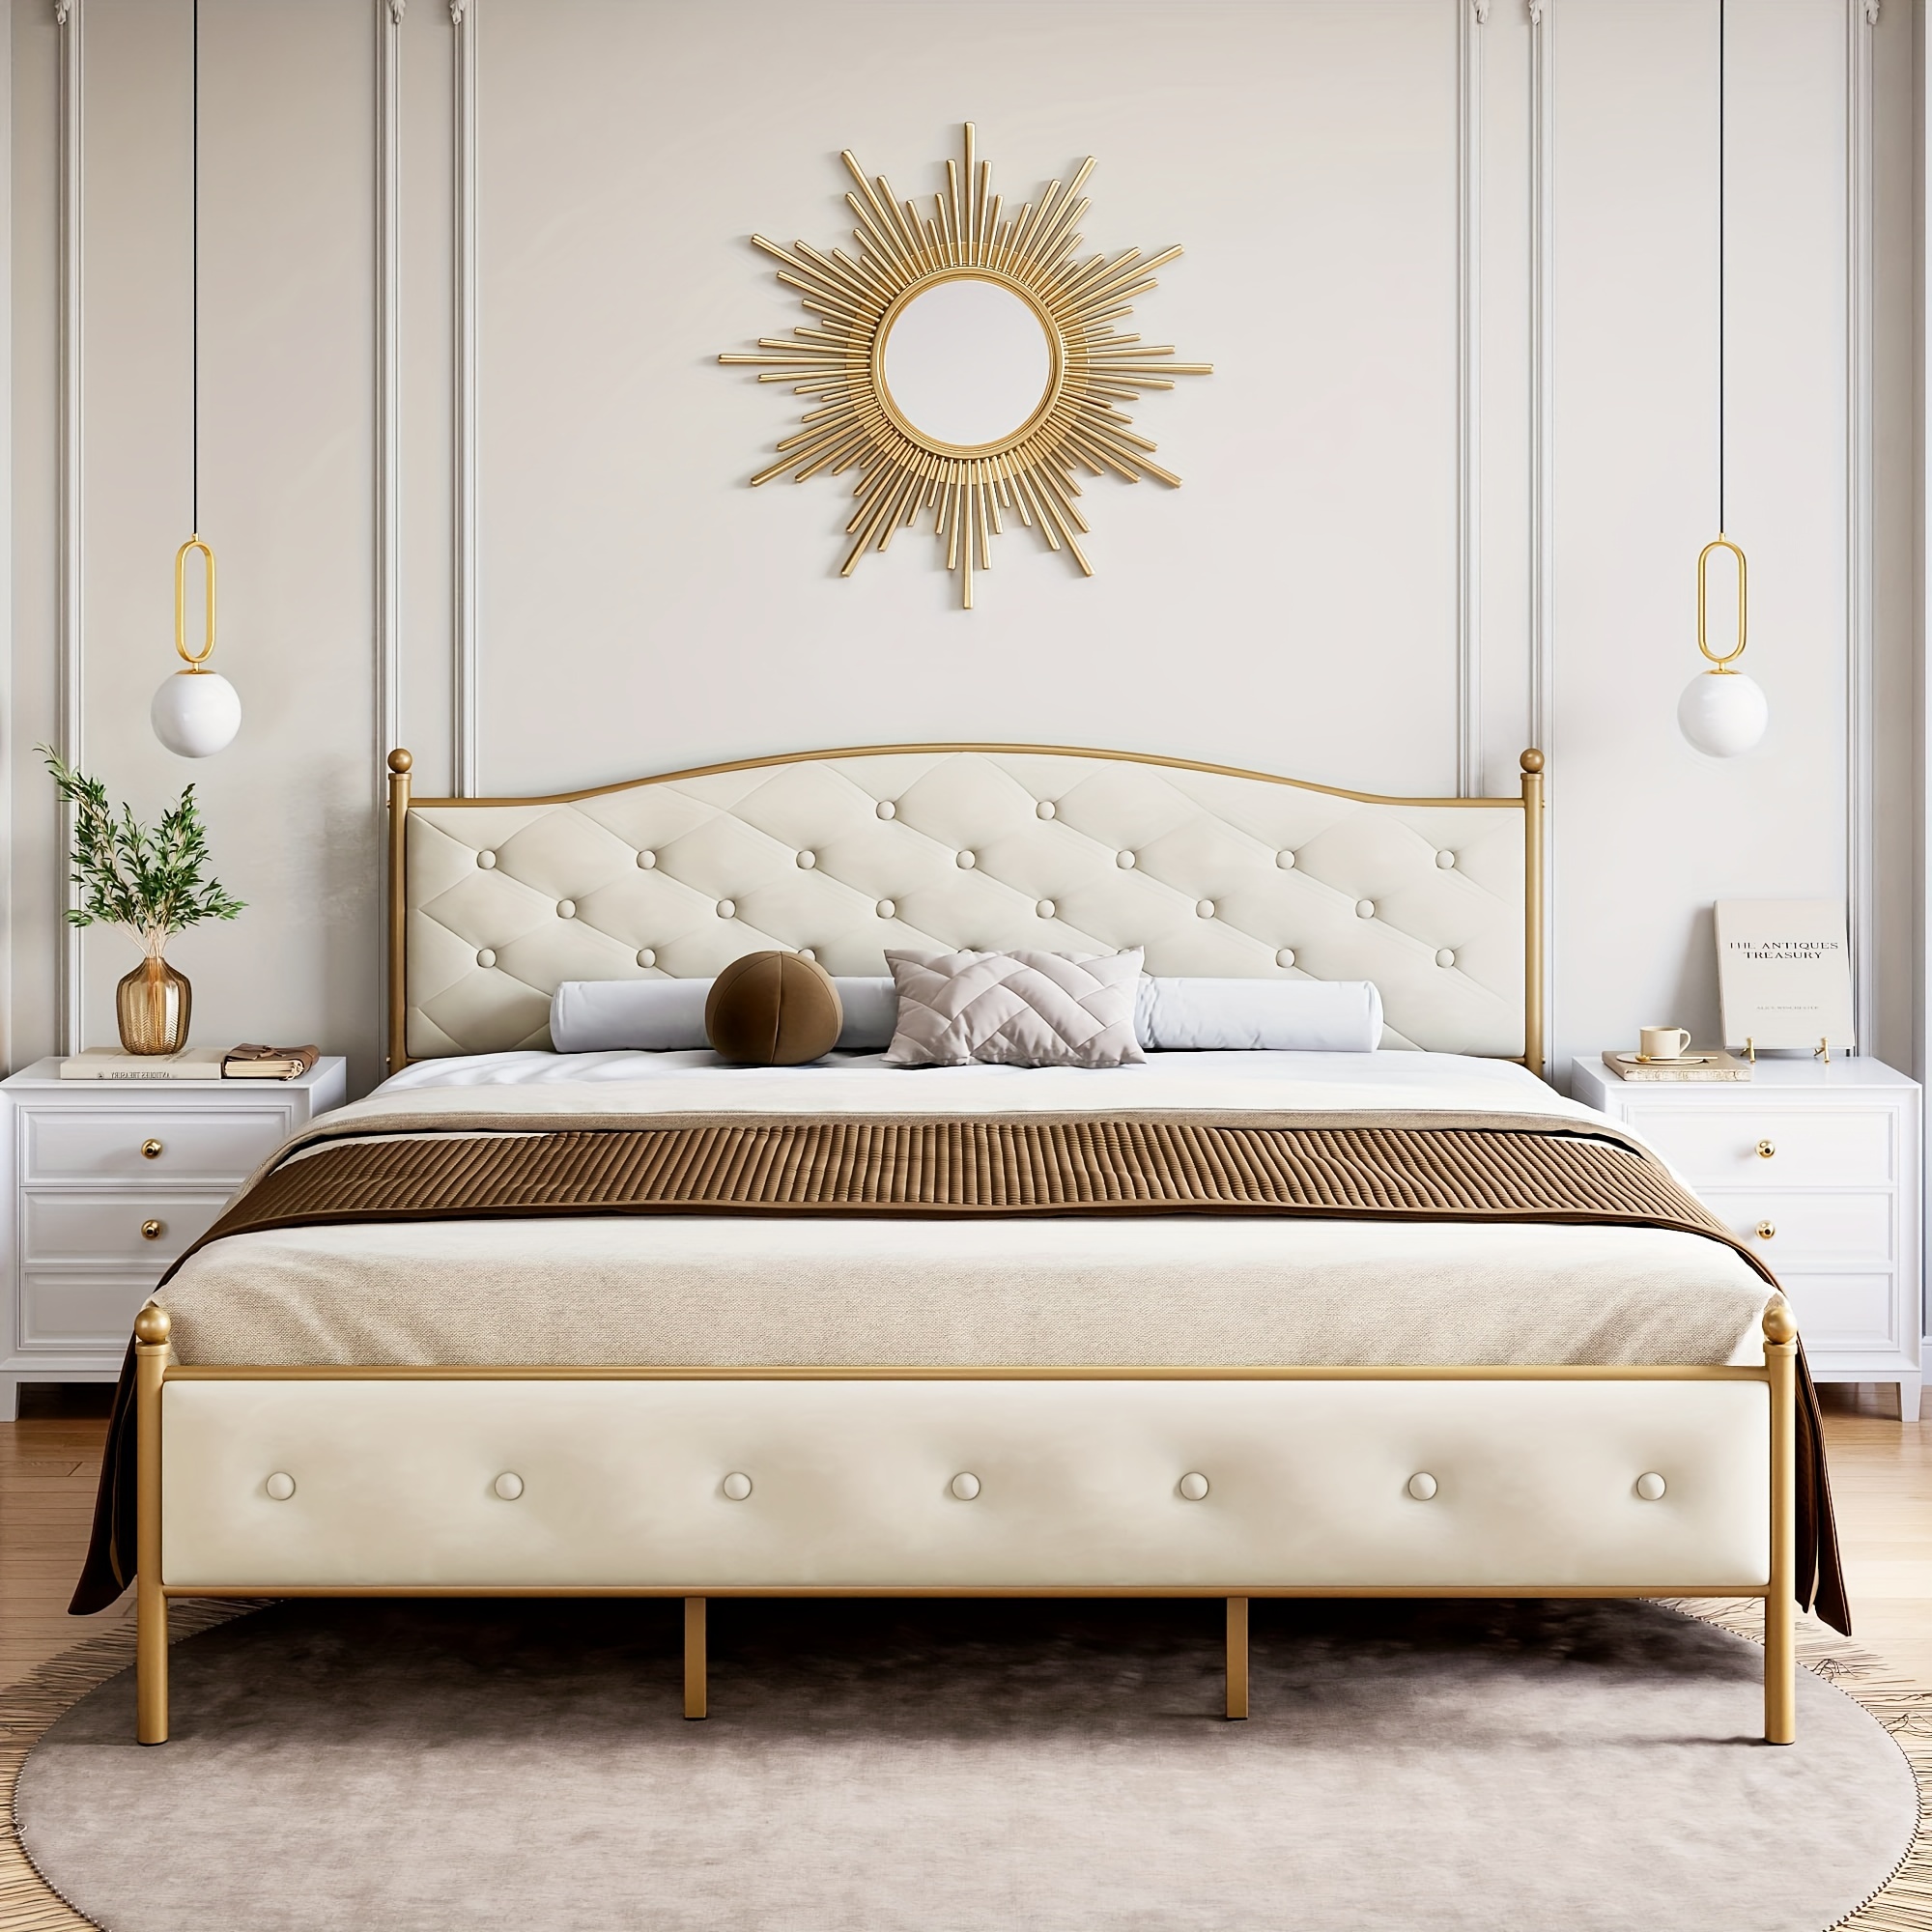 

1 Set Bed Frame, Velvet Upholstered Platform Bed With Button Tufted Headboard, Heavy Duty Mattress Foundation With Solid Wood Slats Support, No Box Spring Needed, Gold And White